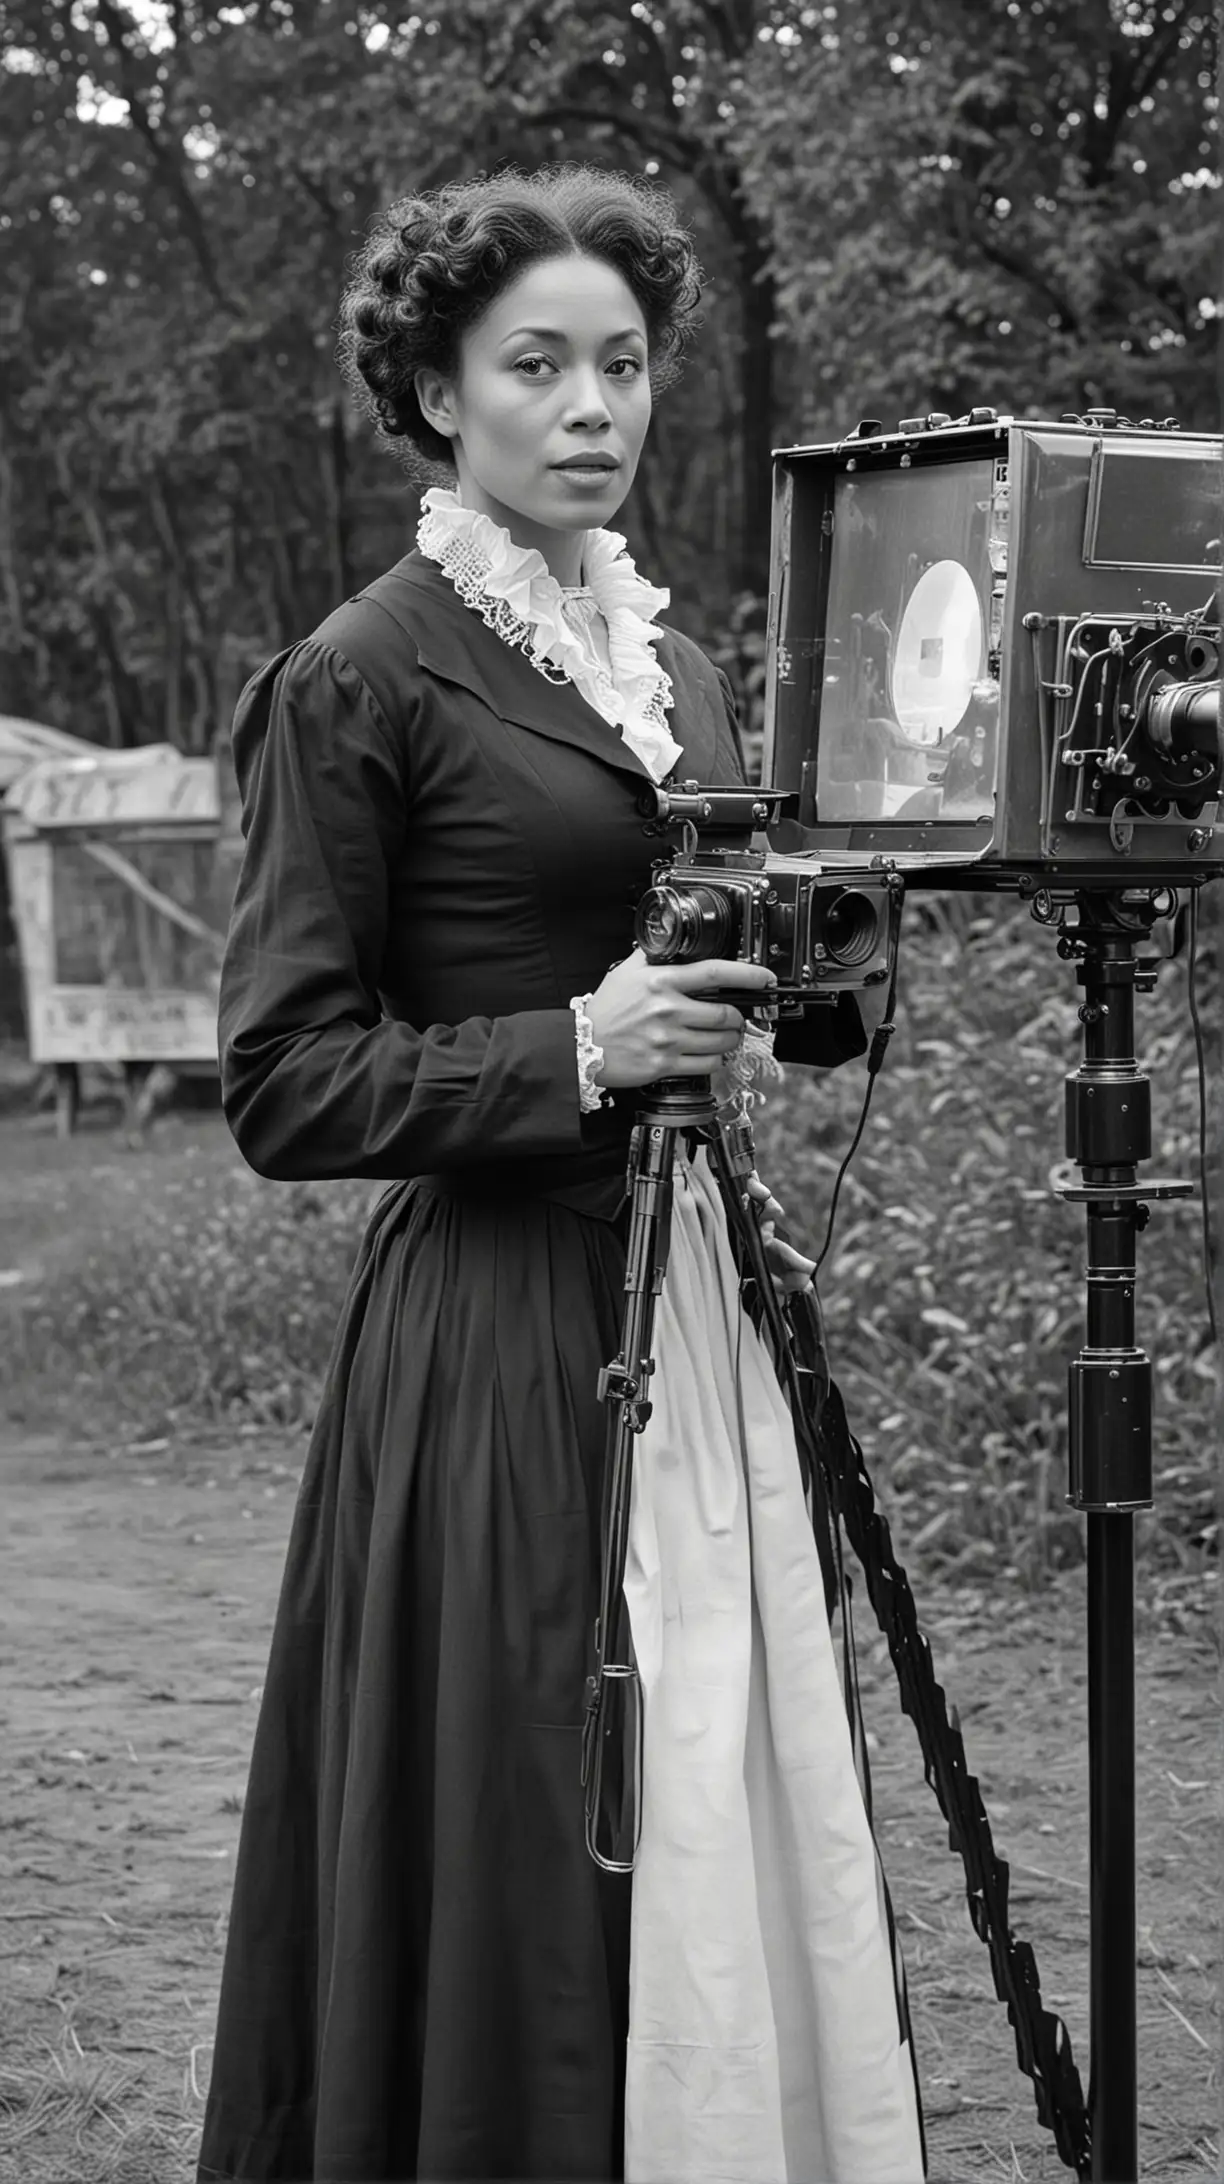 1800s A light skin Maria P. Williams Film producer, Filming a movie in black in white picture 